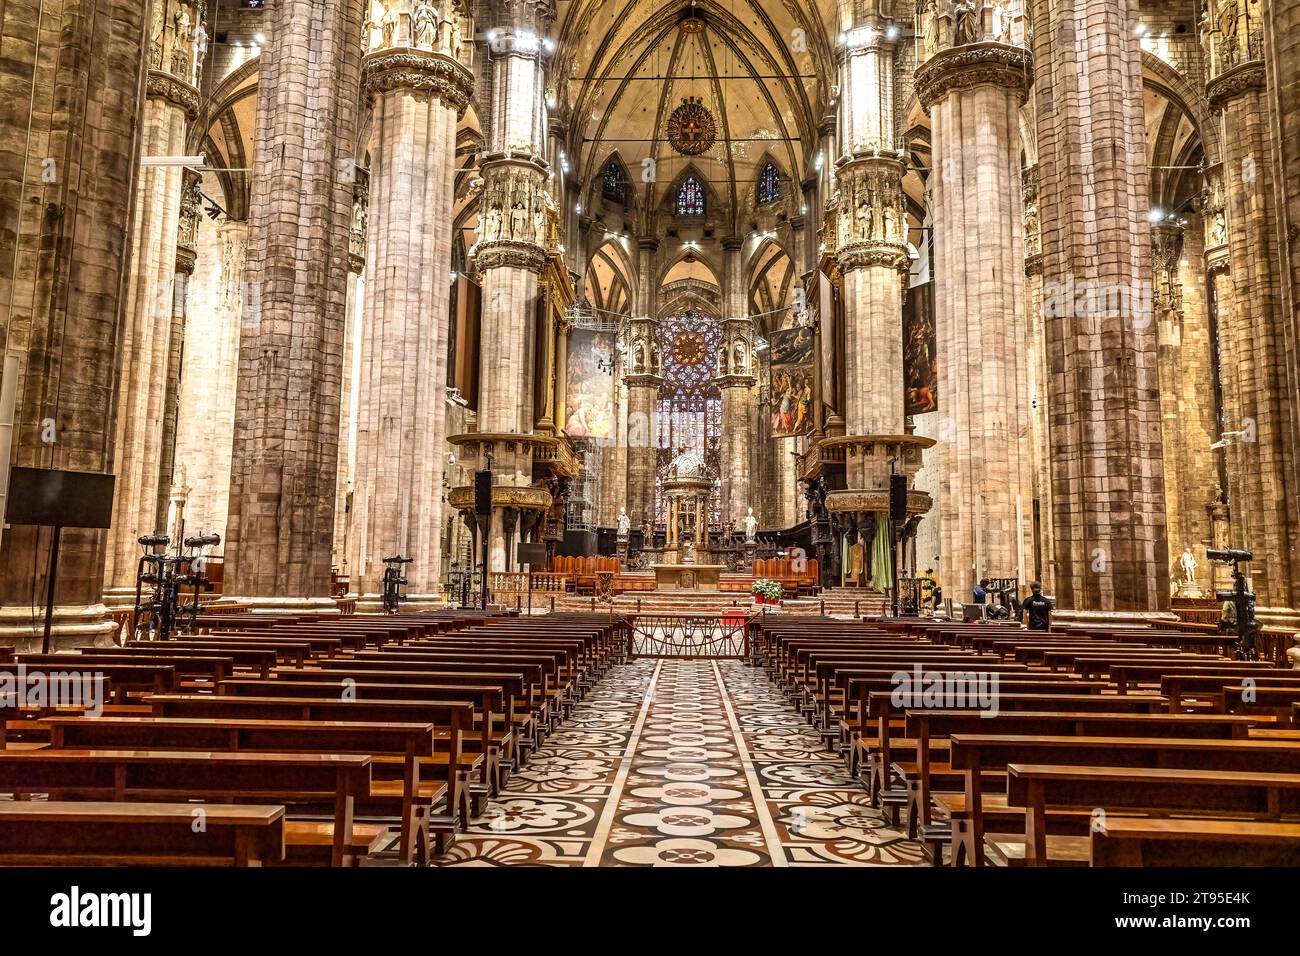 Milan Cathedral interior, the Metropolitan Cathedral-Basilica of the Nativity of Saint Mary, is the cathedral church of Milan, Lombardy, Italy. Stock Photo